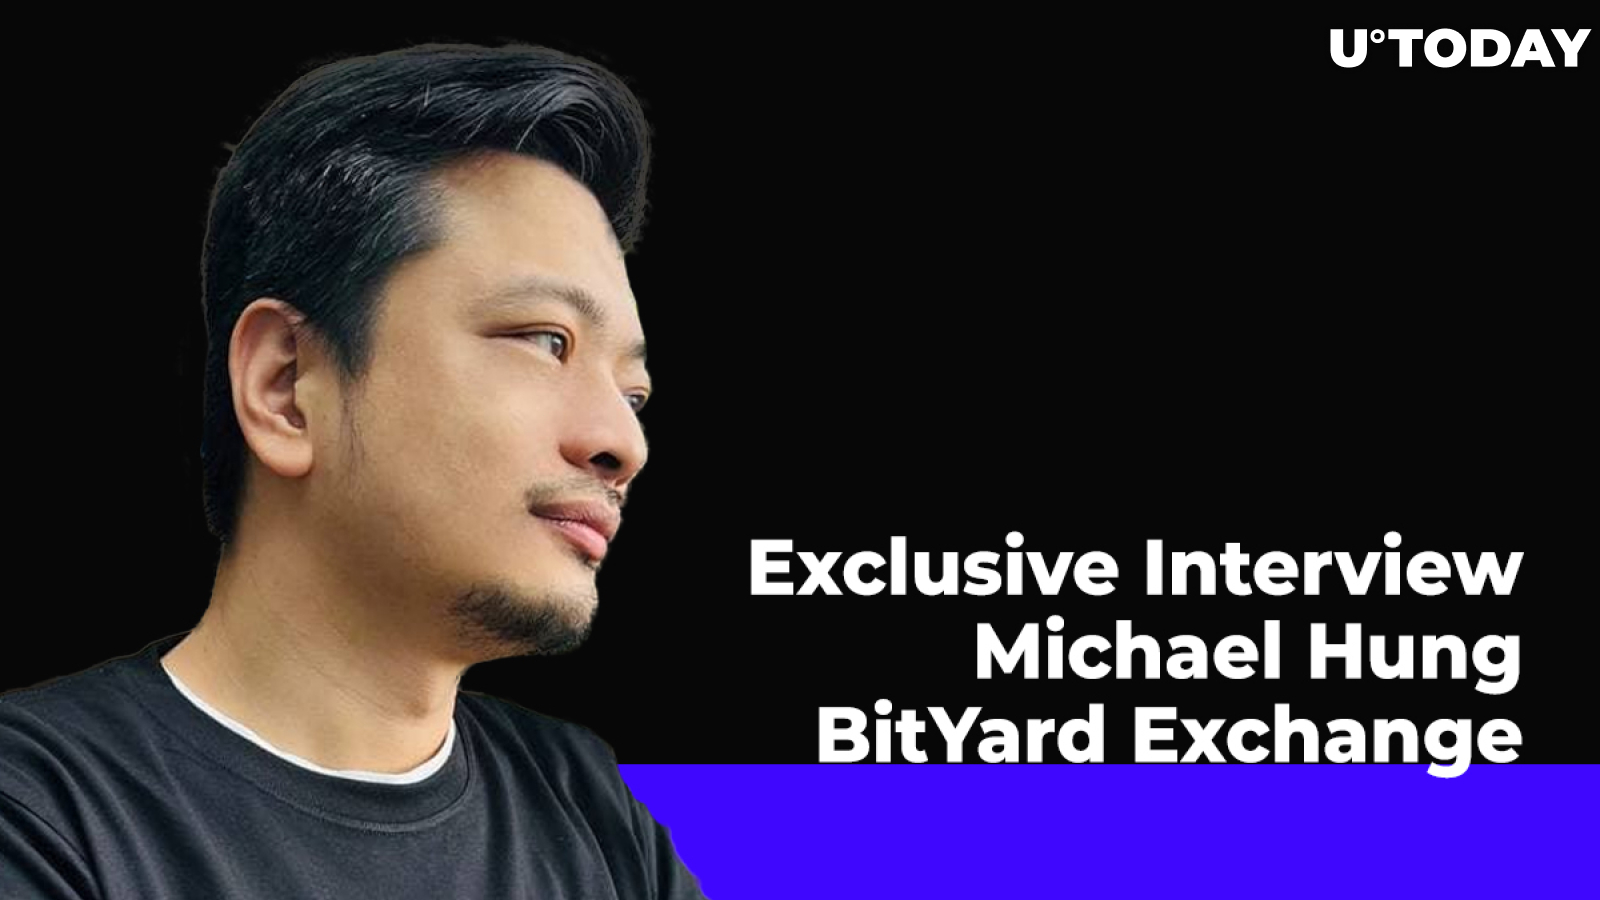 Exclusive Interview with BitYard’s Michael Hung on Exchange’s Future Plans, Trading Options and Meme Coins